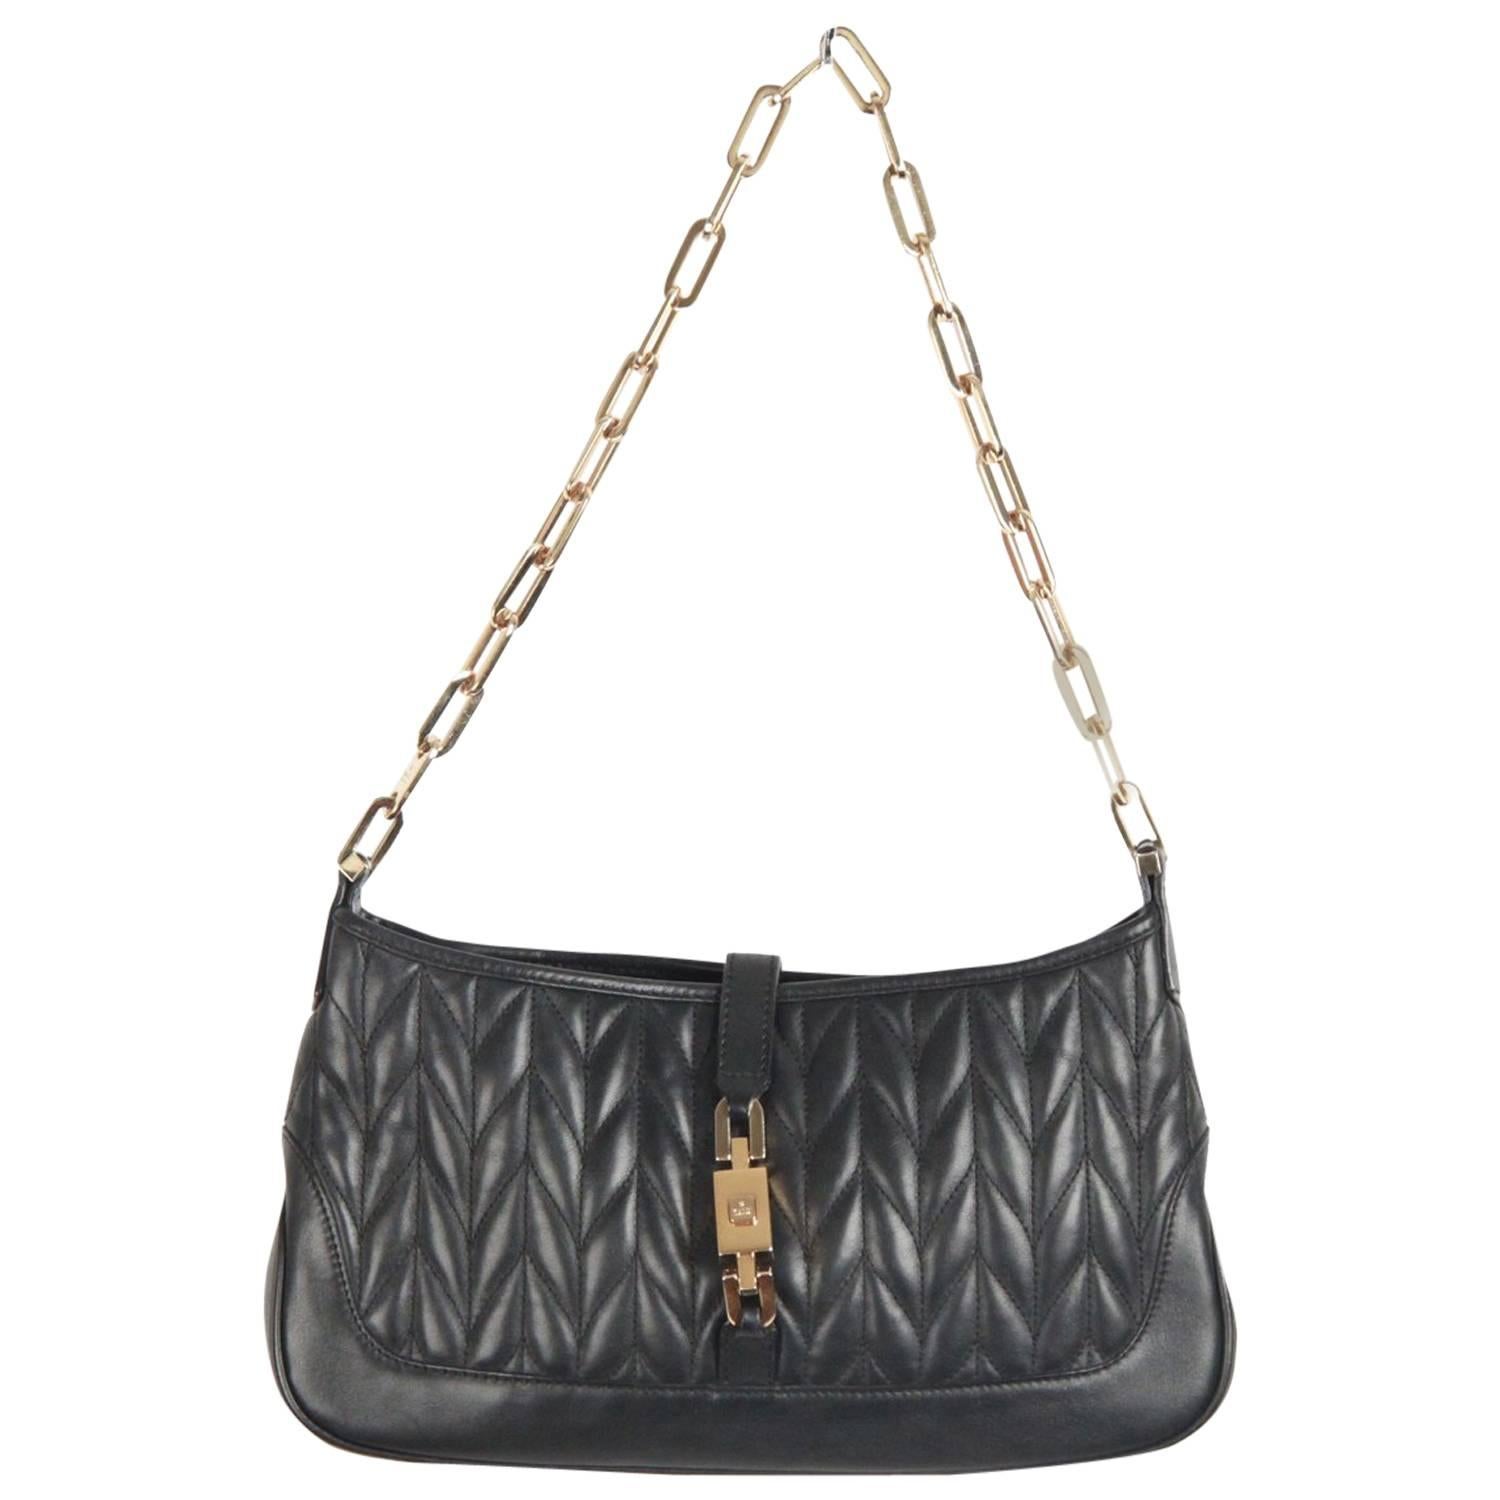 GUCCI Black Quilted Leather JACKIE SHOULDER BAG w/ Chain Strap